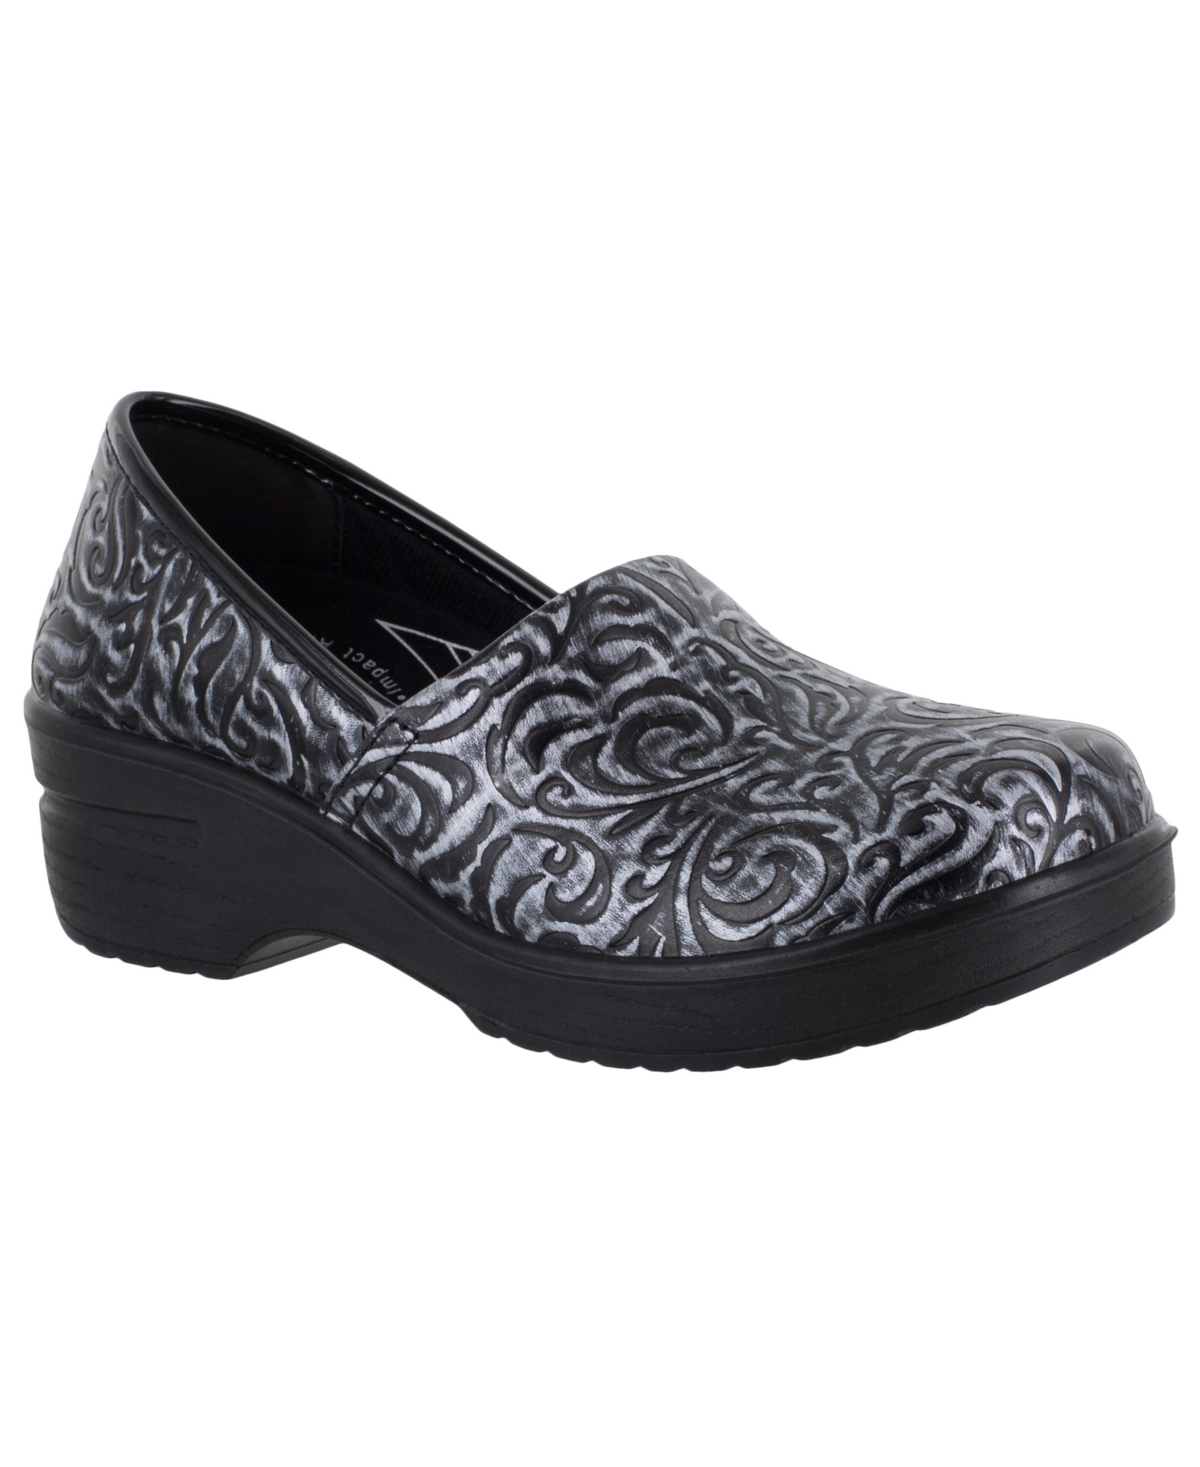 EASY STREET EASY WORKS LAURIE CLOGS WOMEN'S SHOES